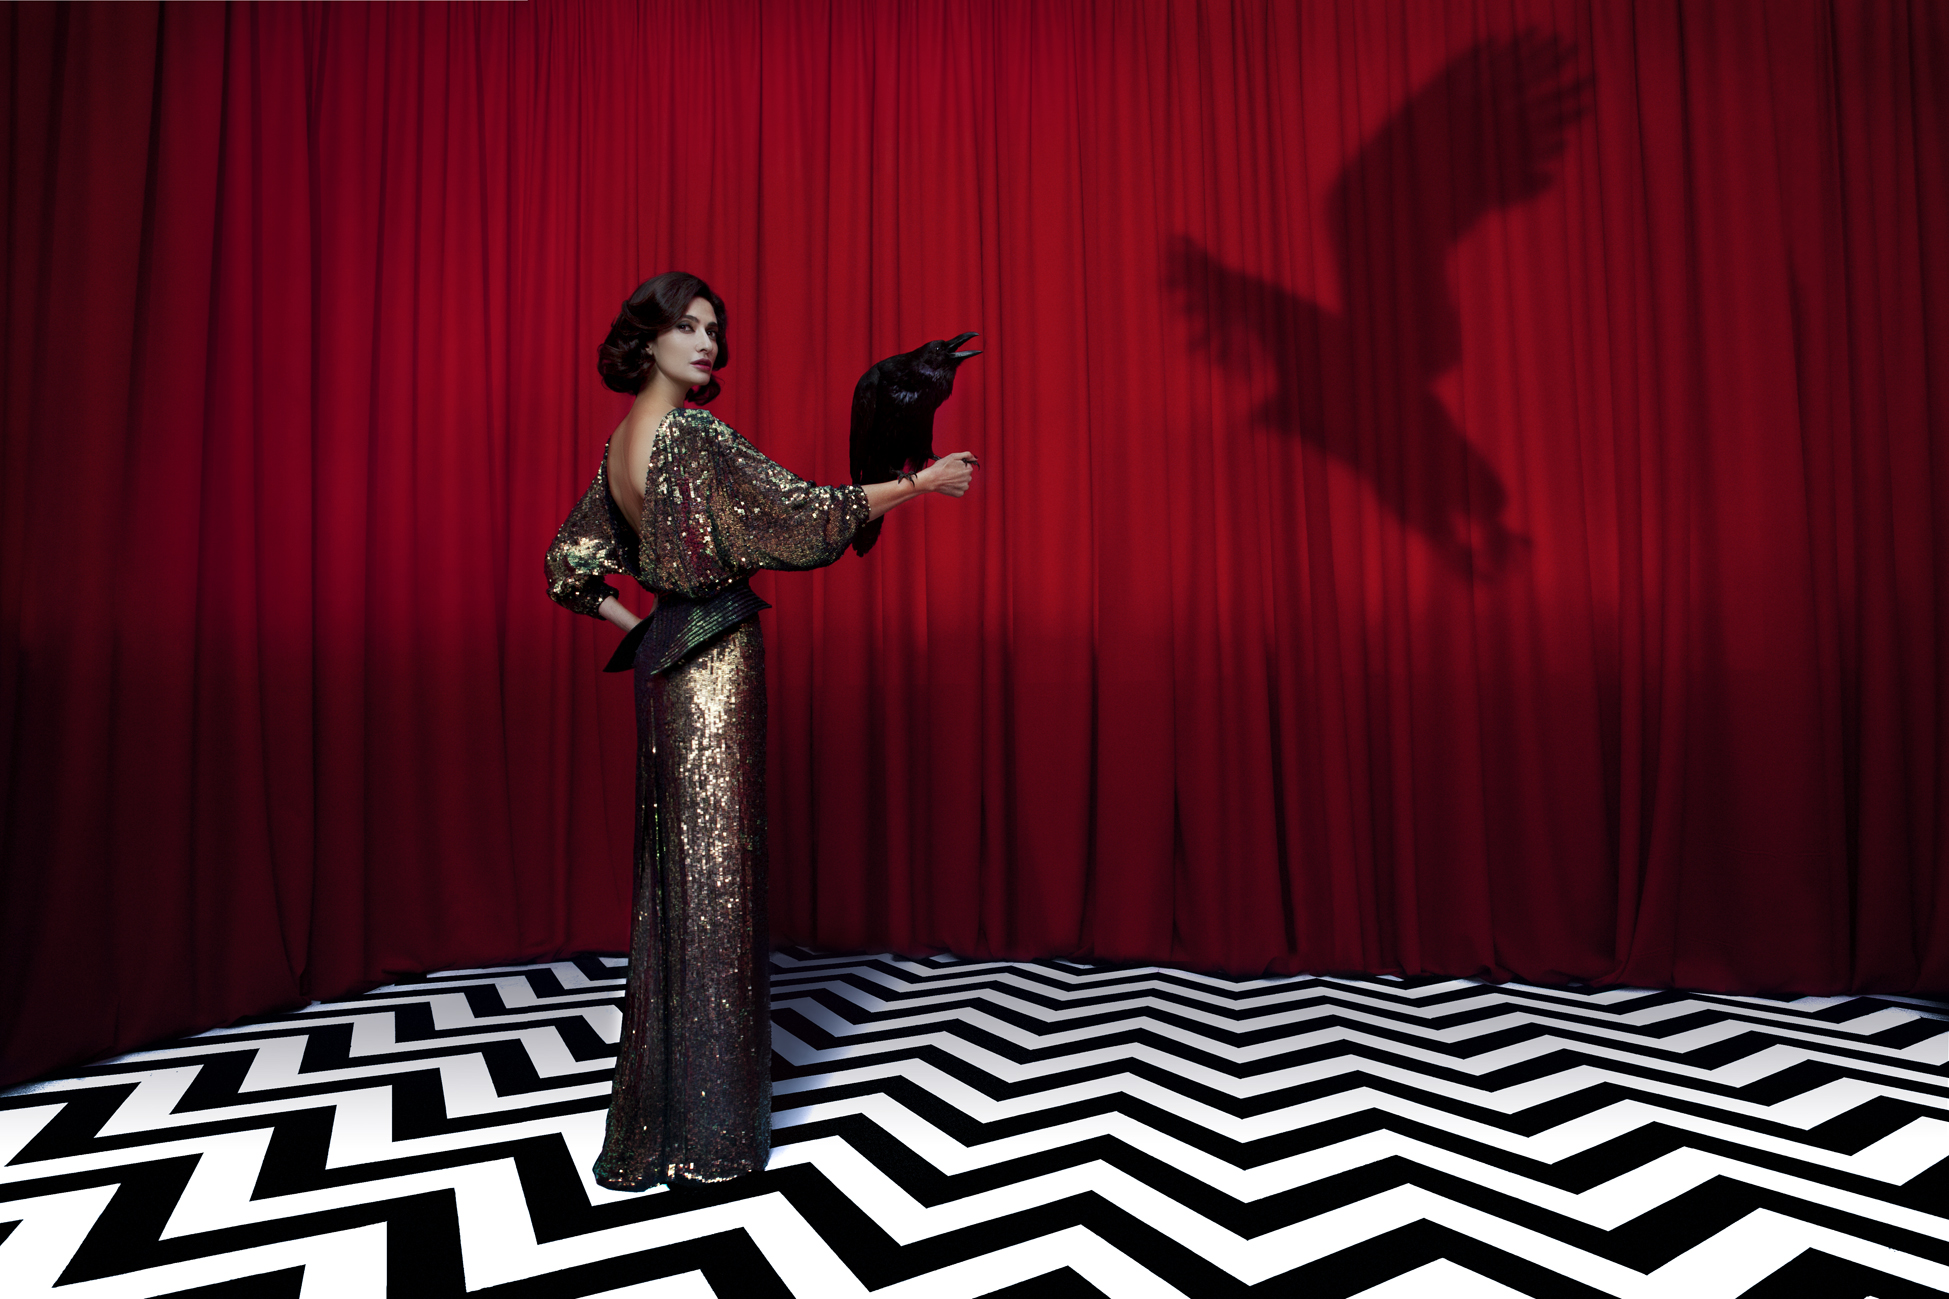 twin peaks wallpaper,performance,stage,talent show,textile,performing arts